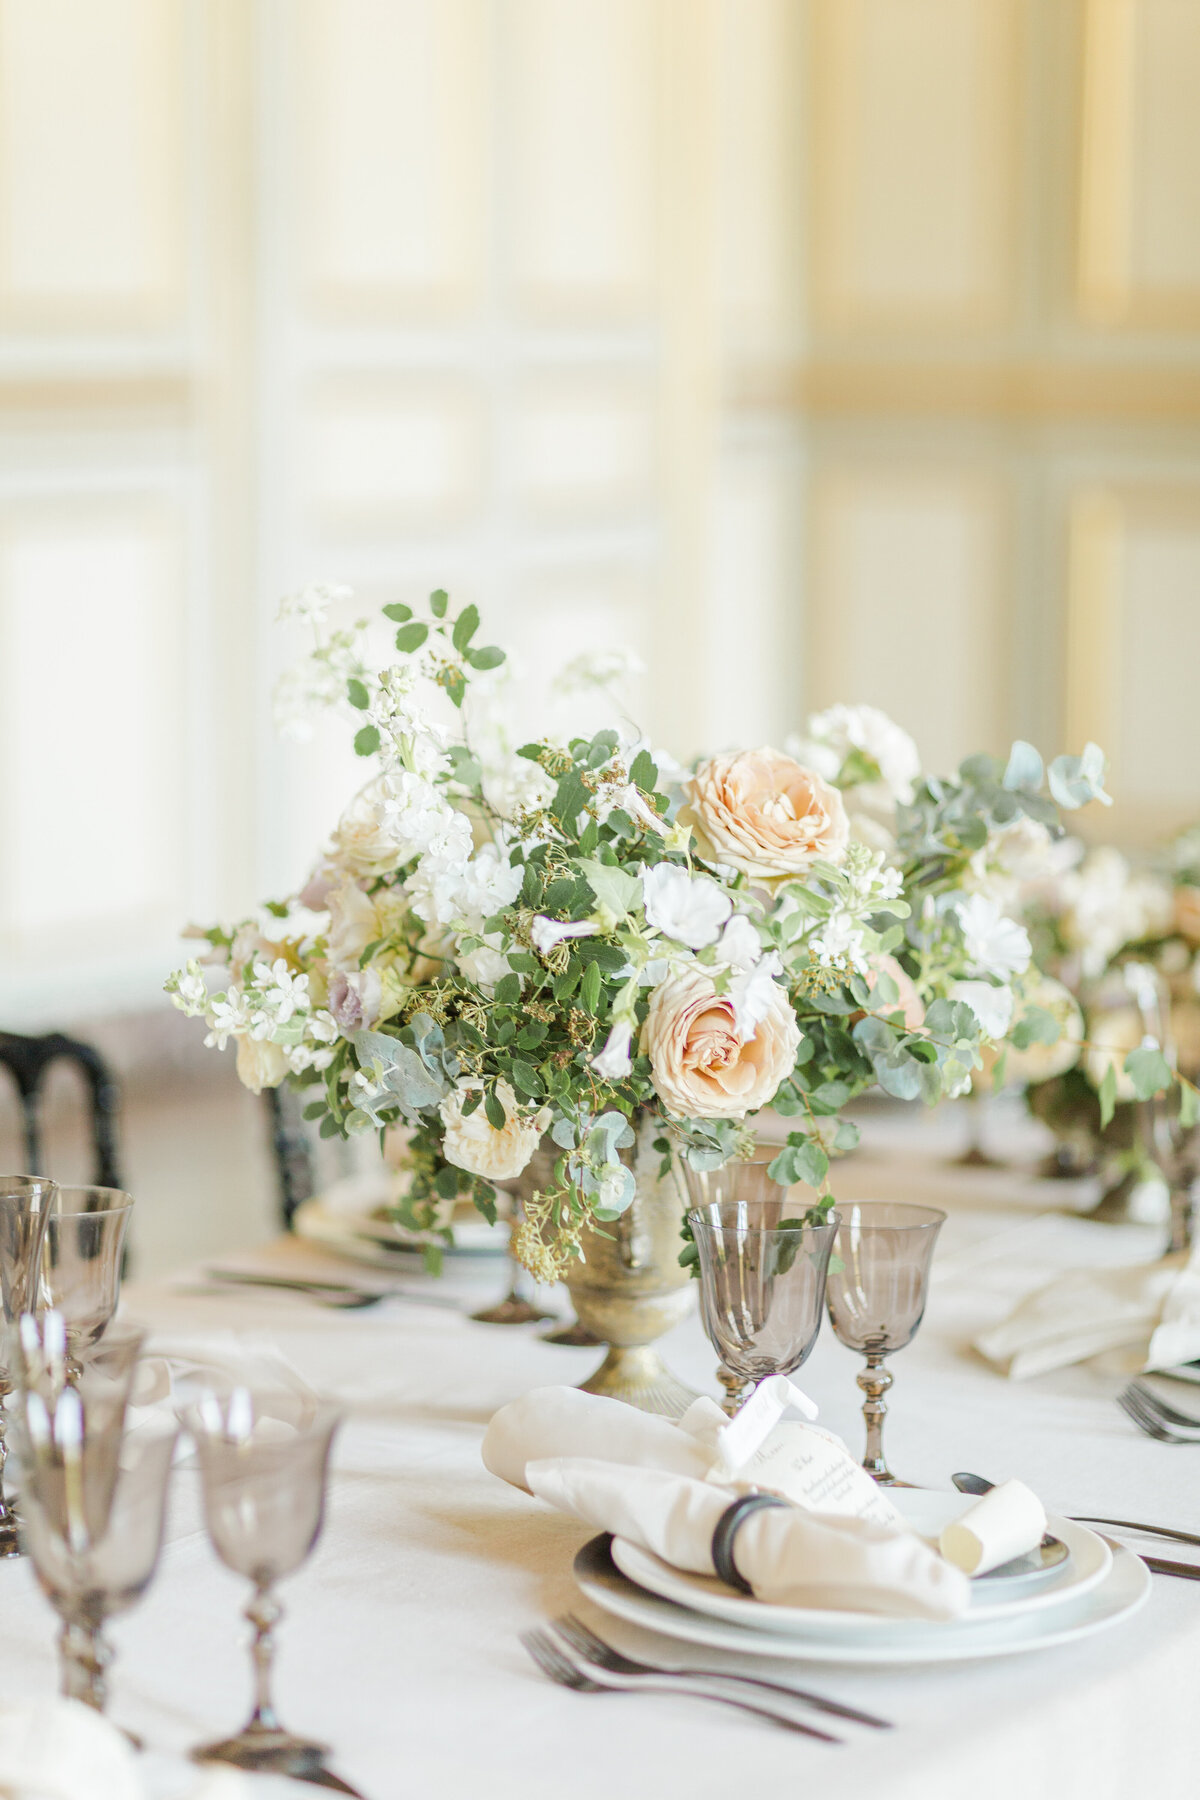 A detail image of a stunning reception tablescape featuring a large bouquet of roses and greenery. Captured by Lia Rose Weddings